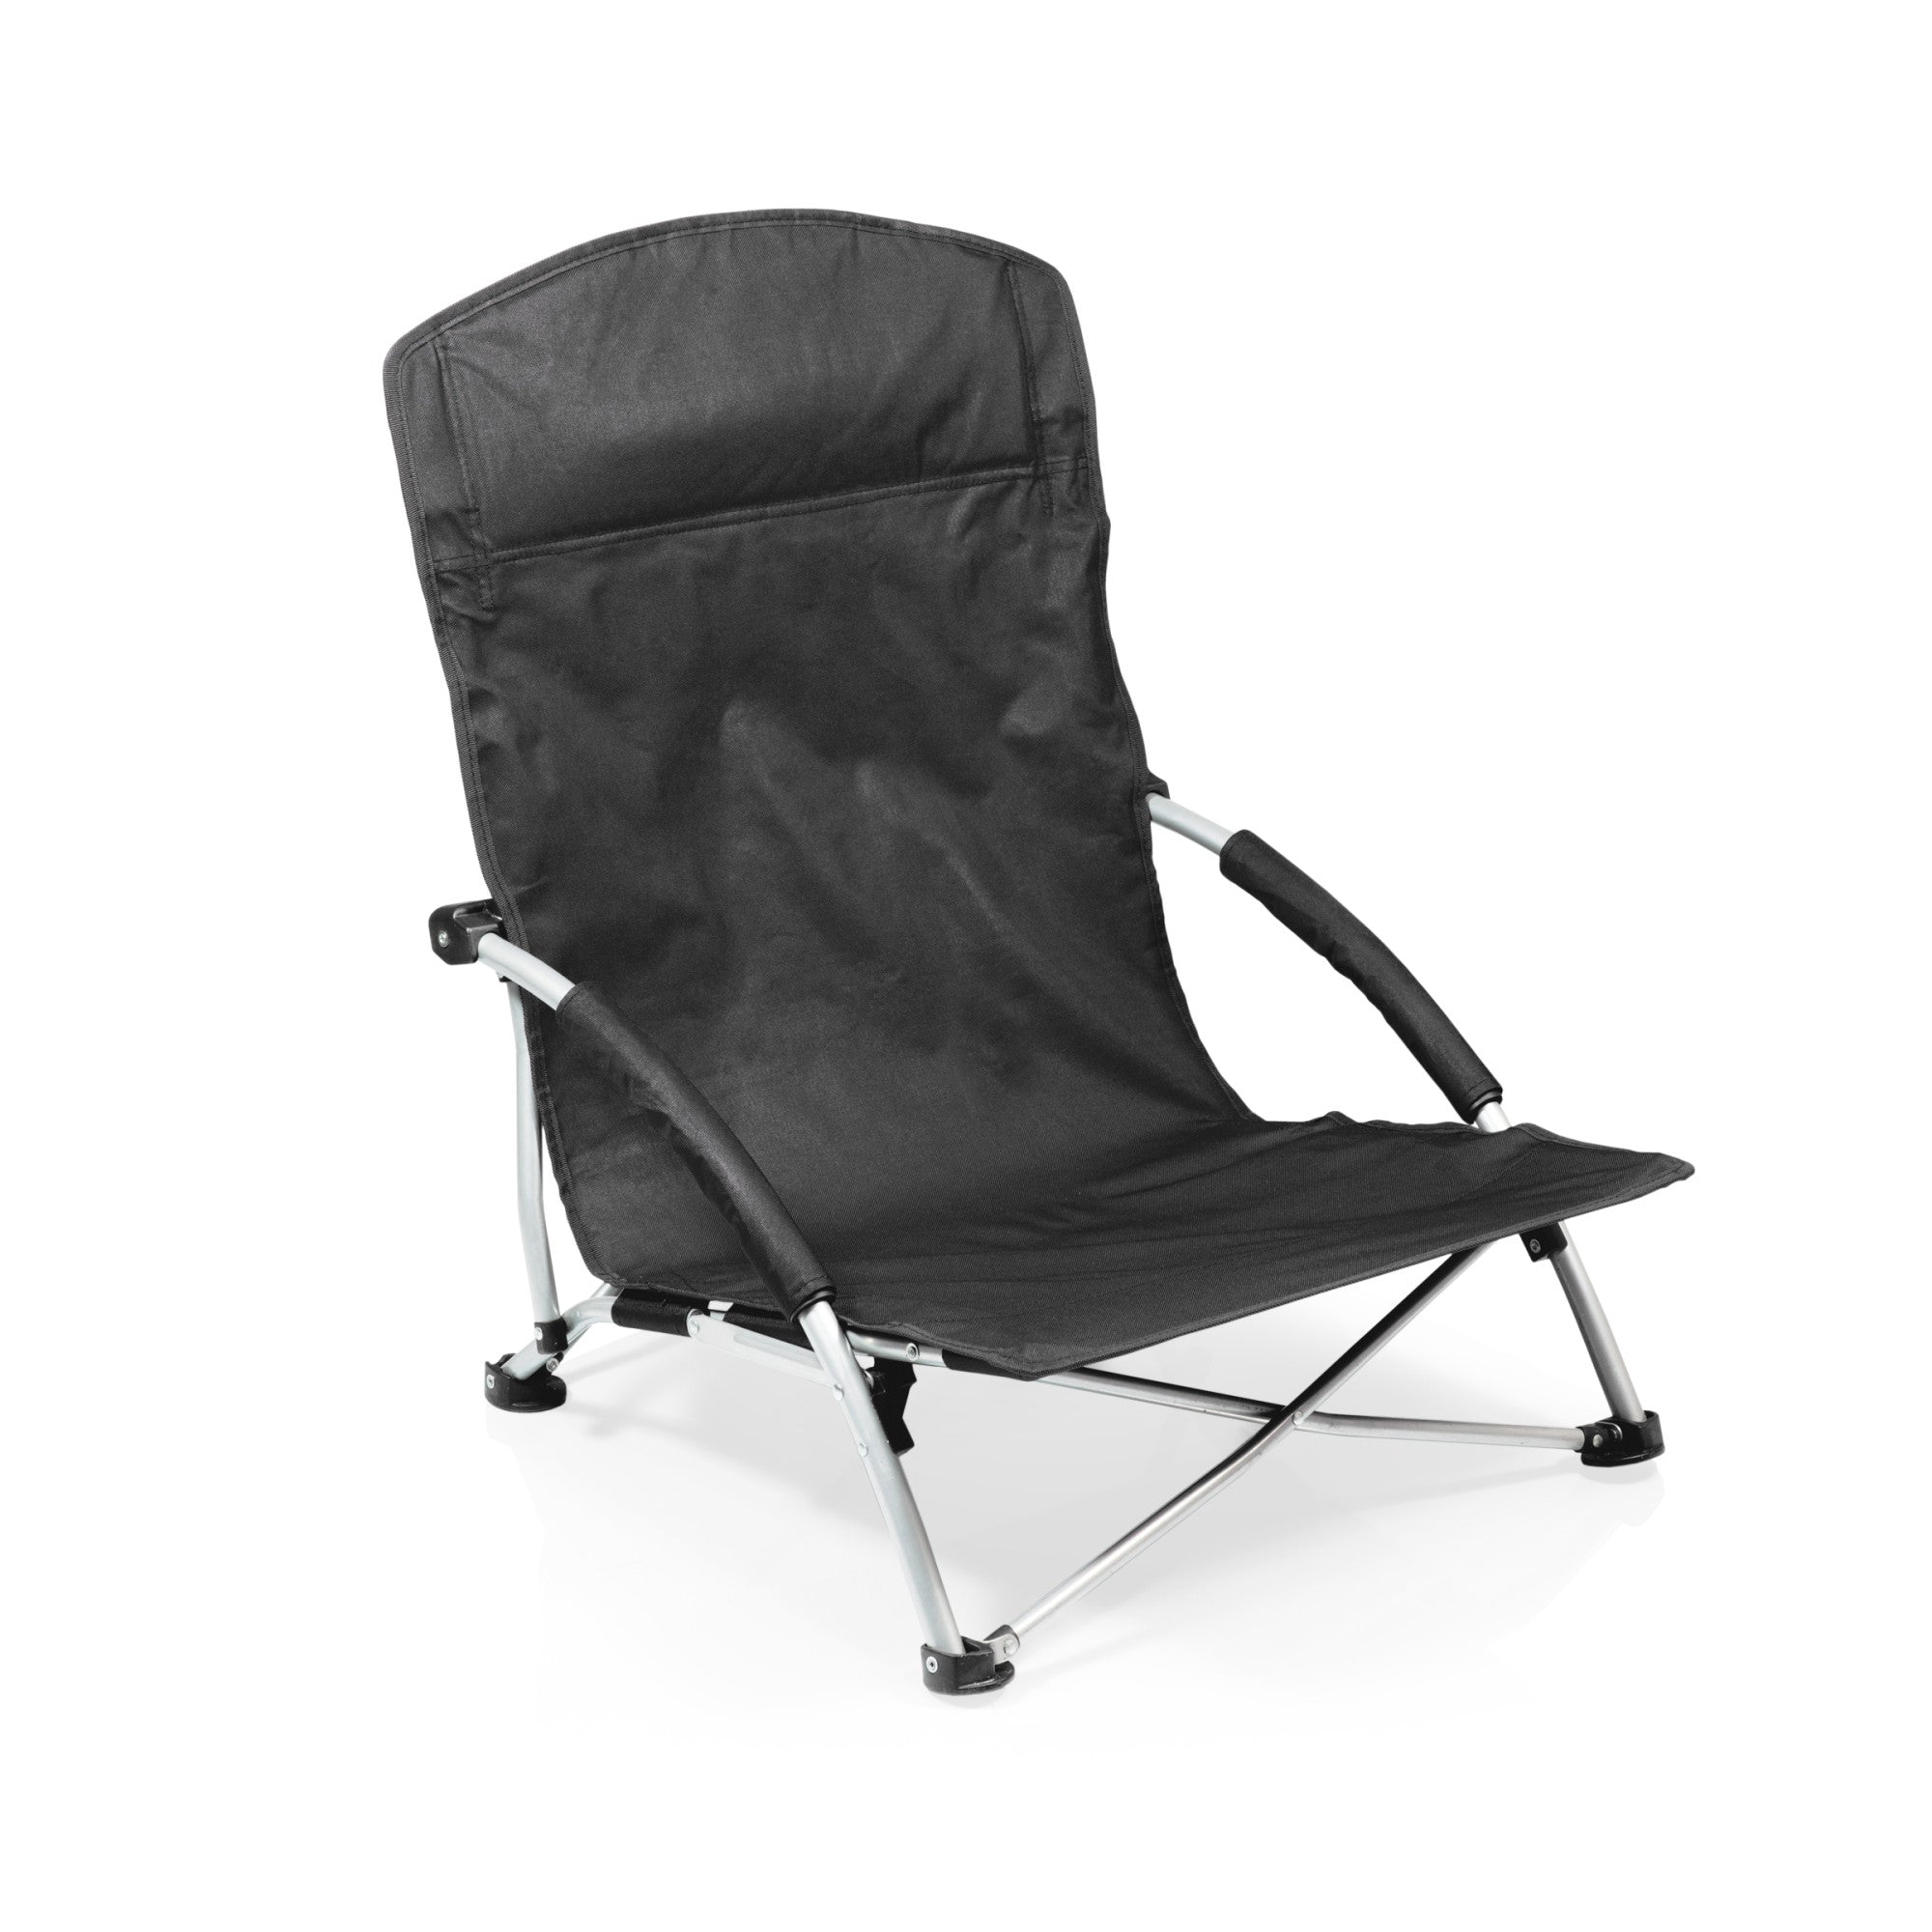 San Diego Padres - Tranquility Beach Chair with Carry Bag